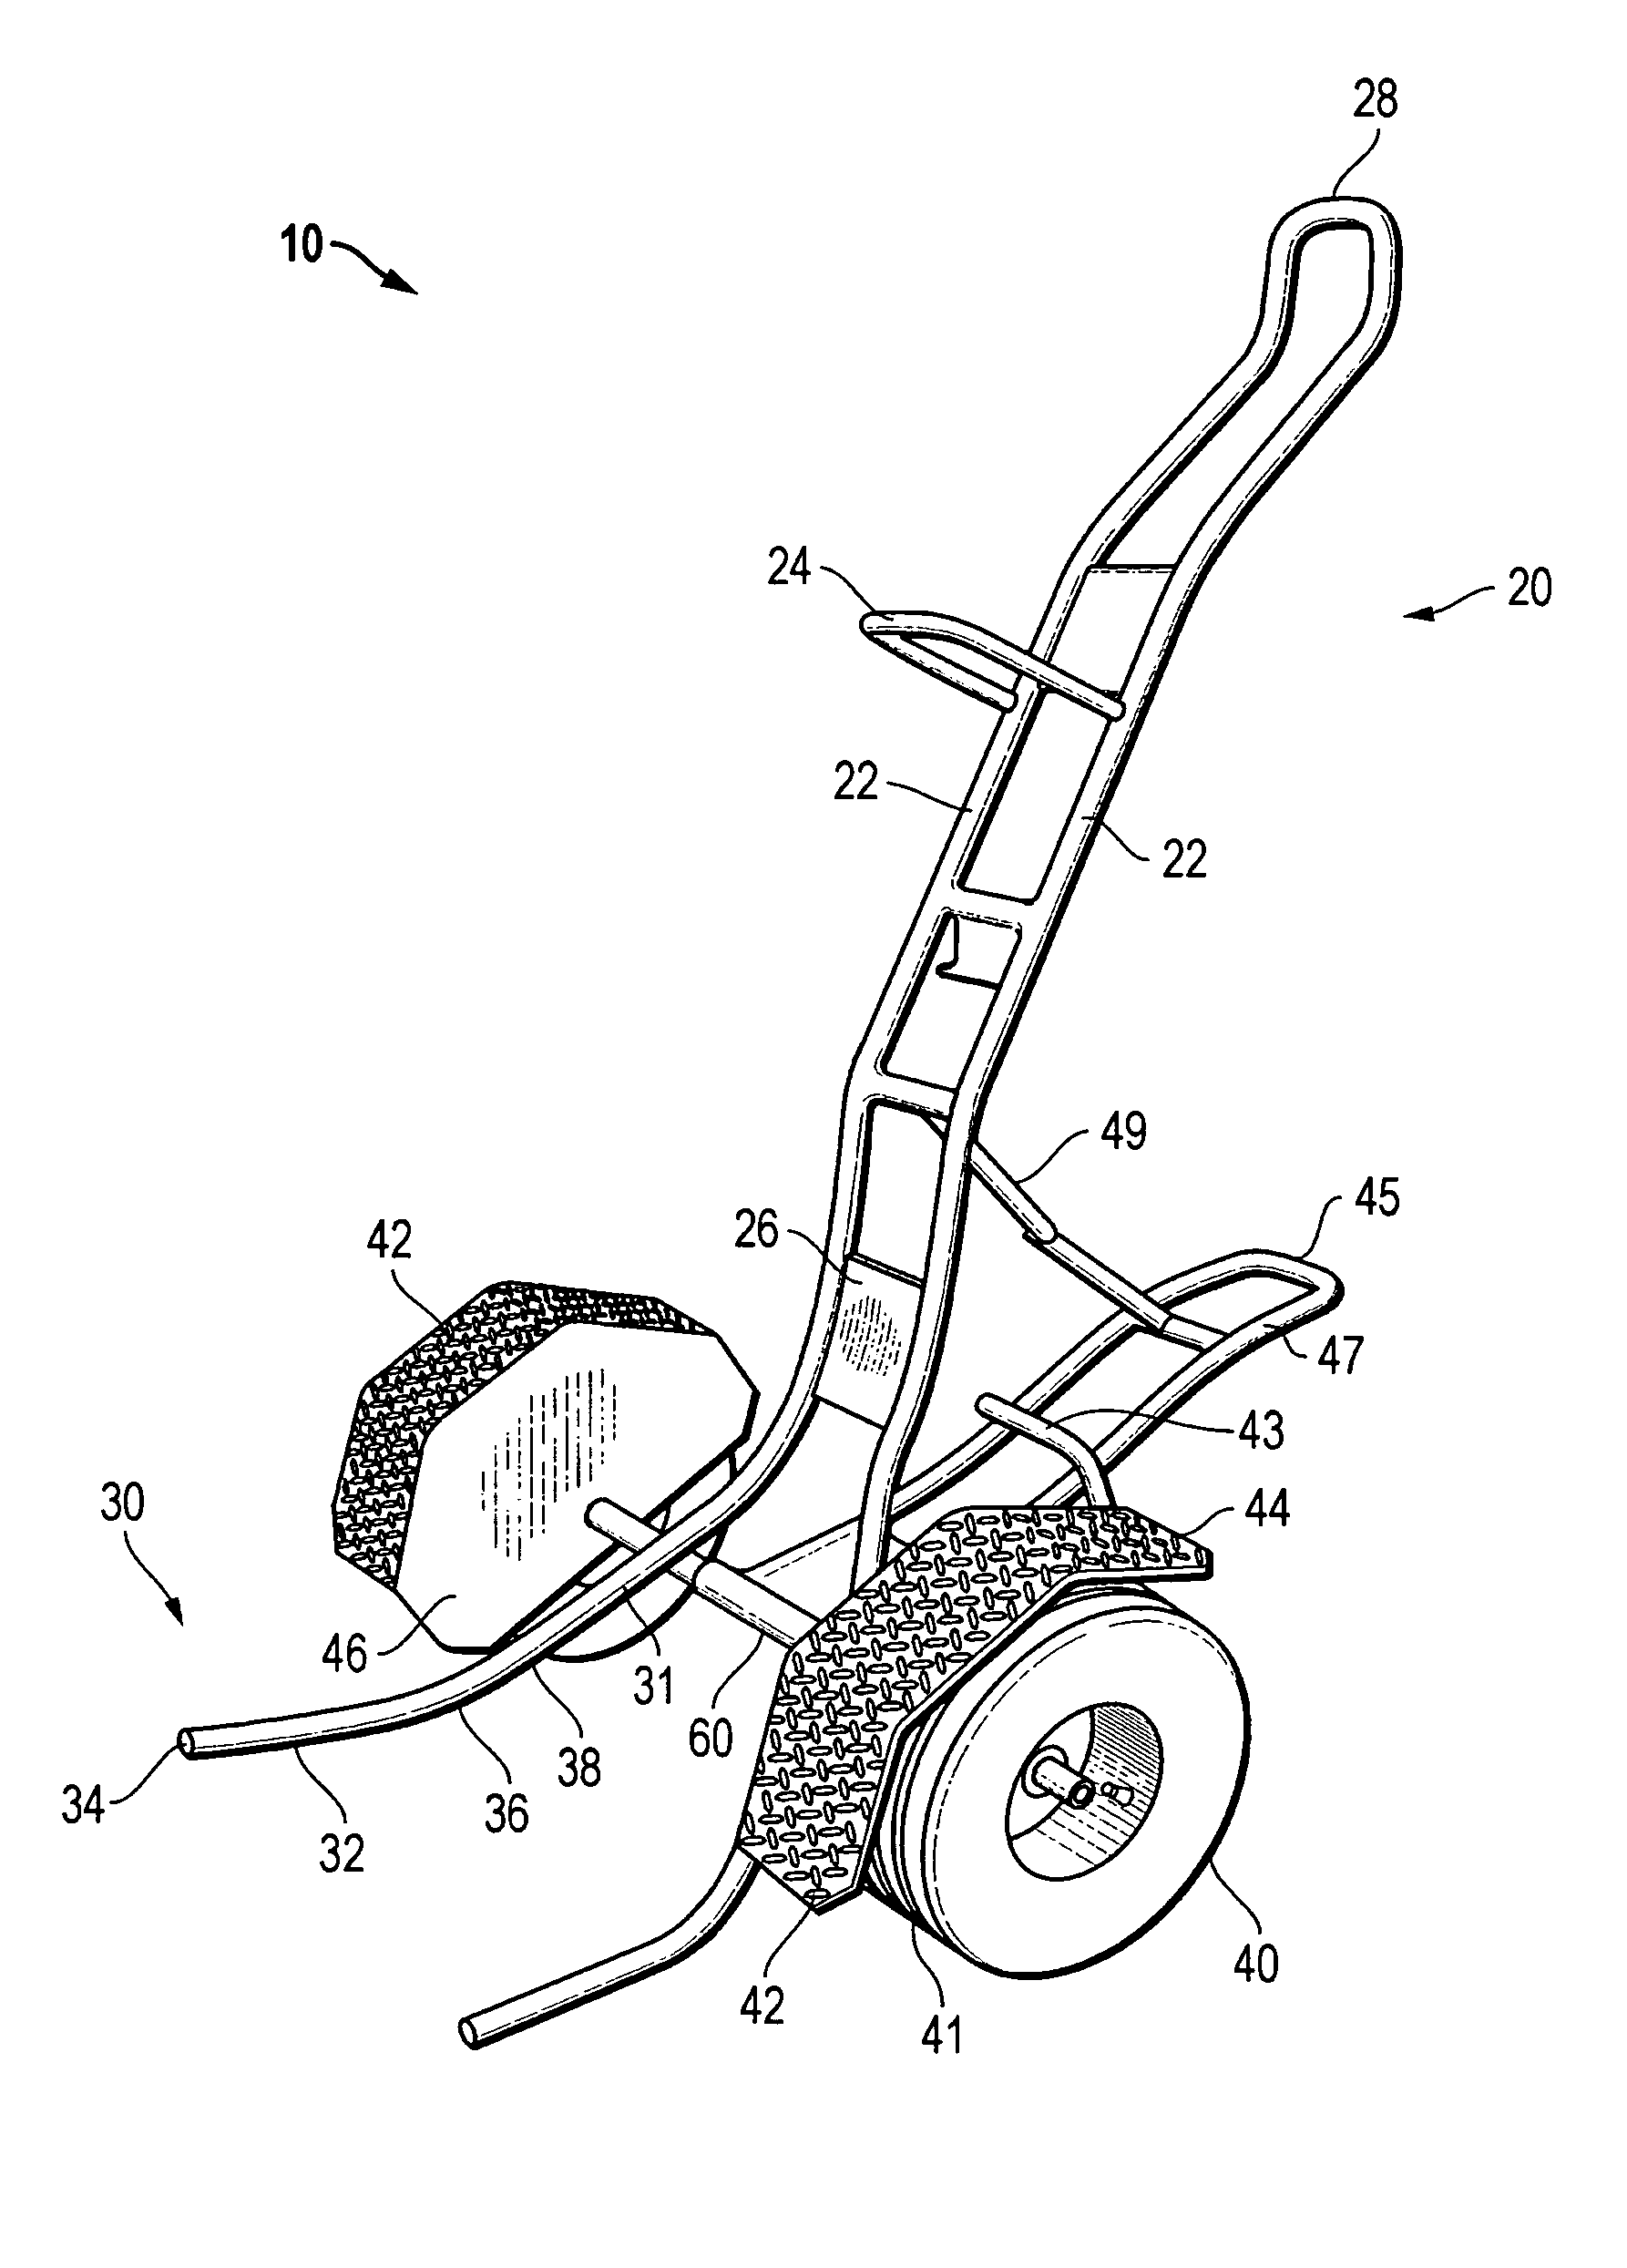 Handling device for wheel assembly components